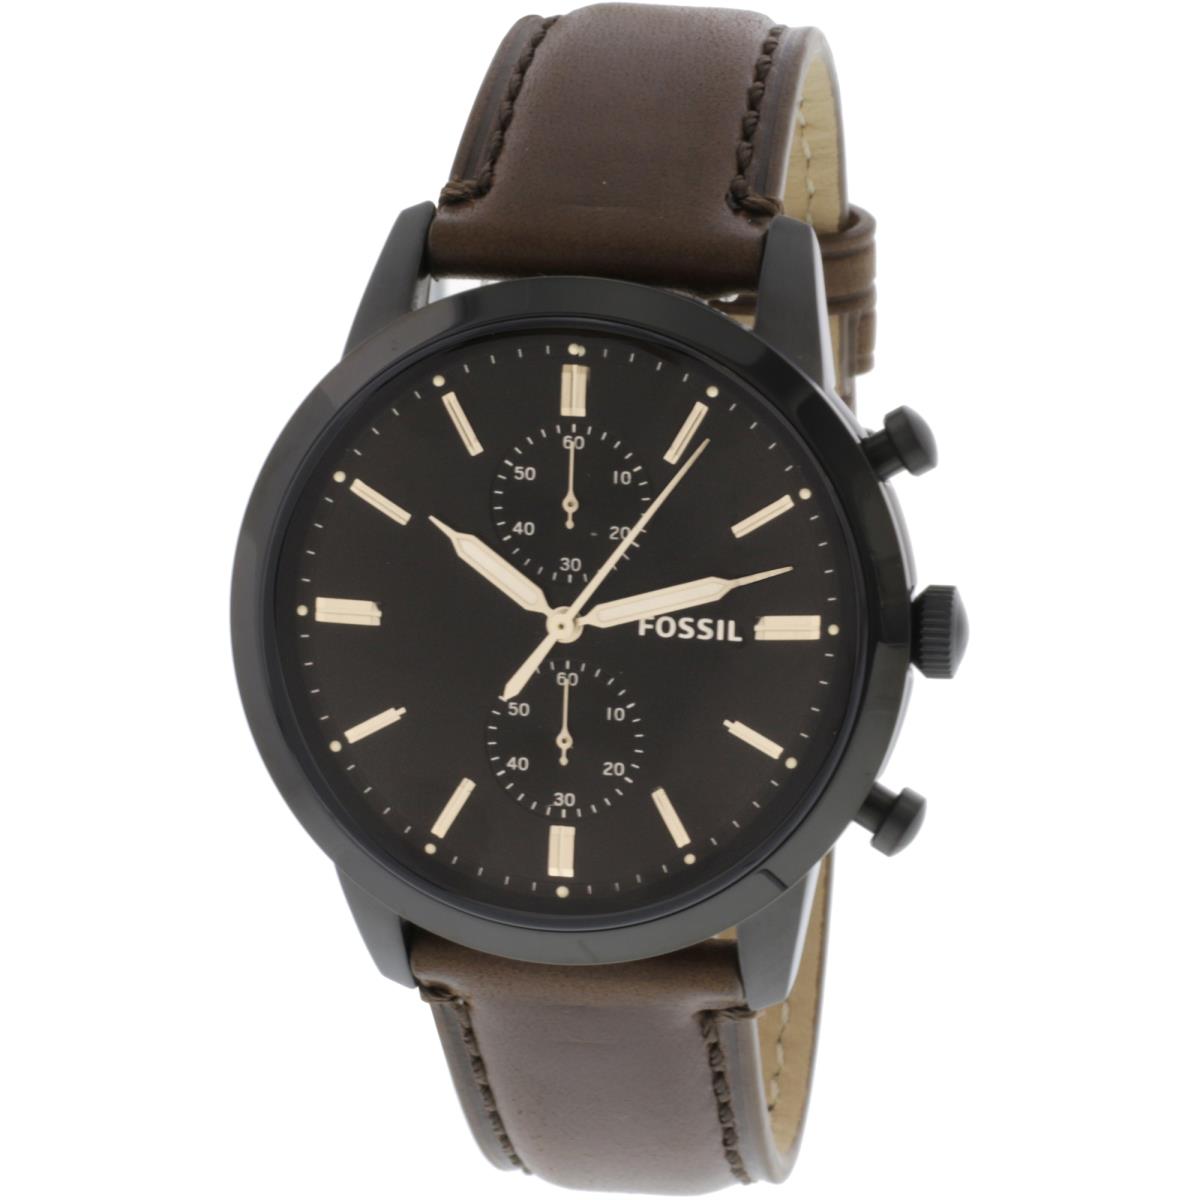 Fossil Townsman FS5437 Elegant Japanese Movement Chronograph Brown Leather Watch - Brown Band